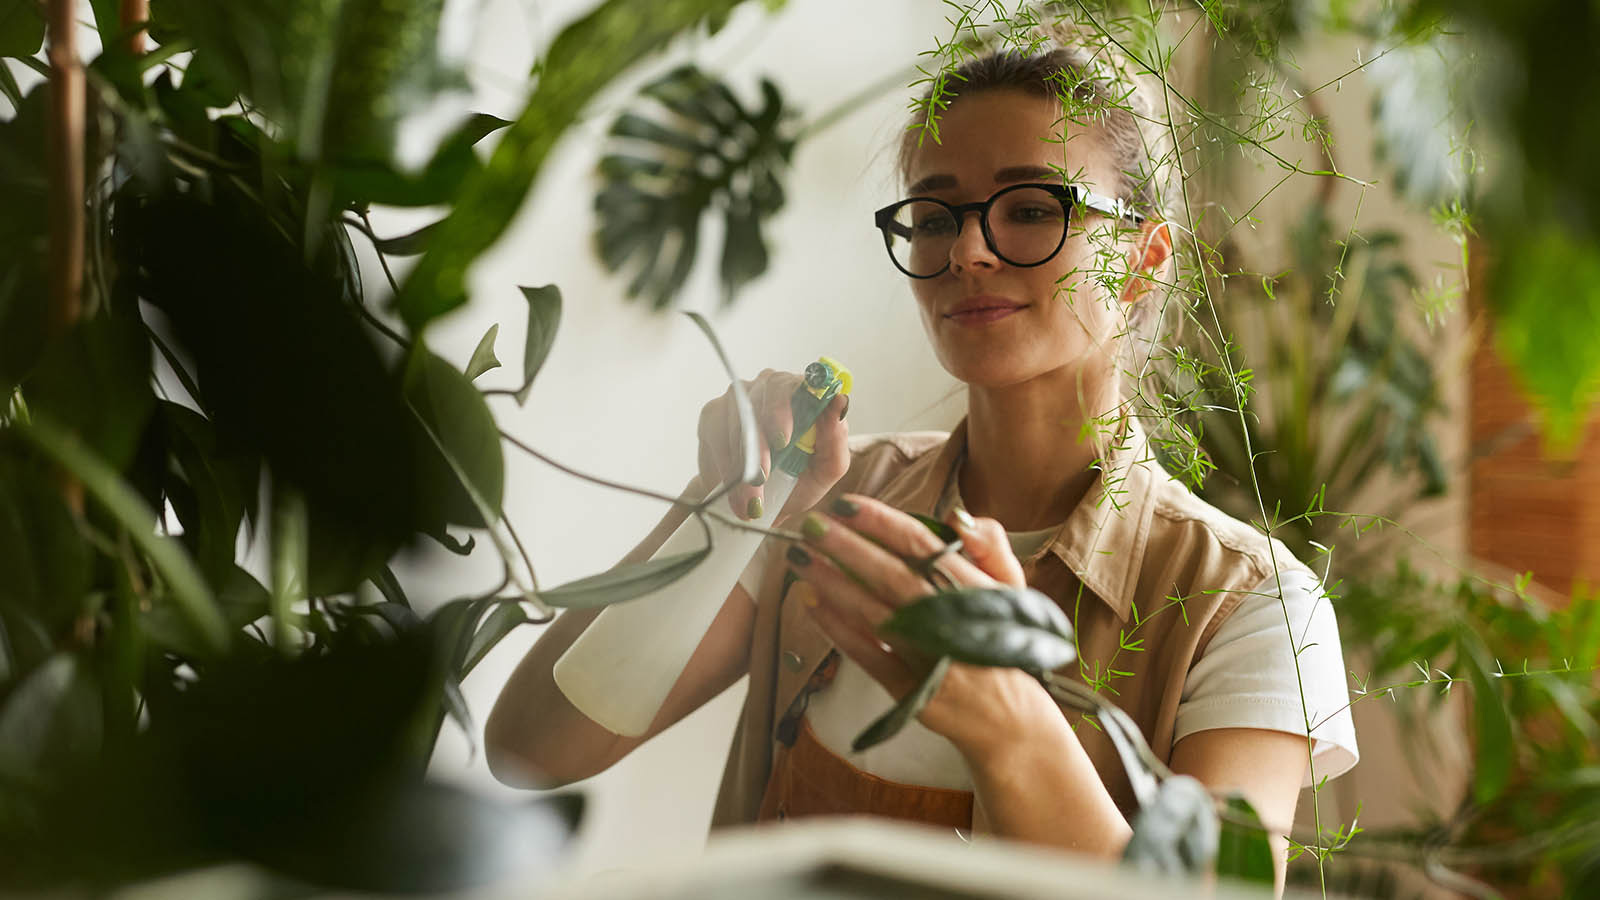 Woman in glasses misting leafy green indoor plants.